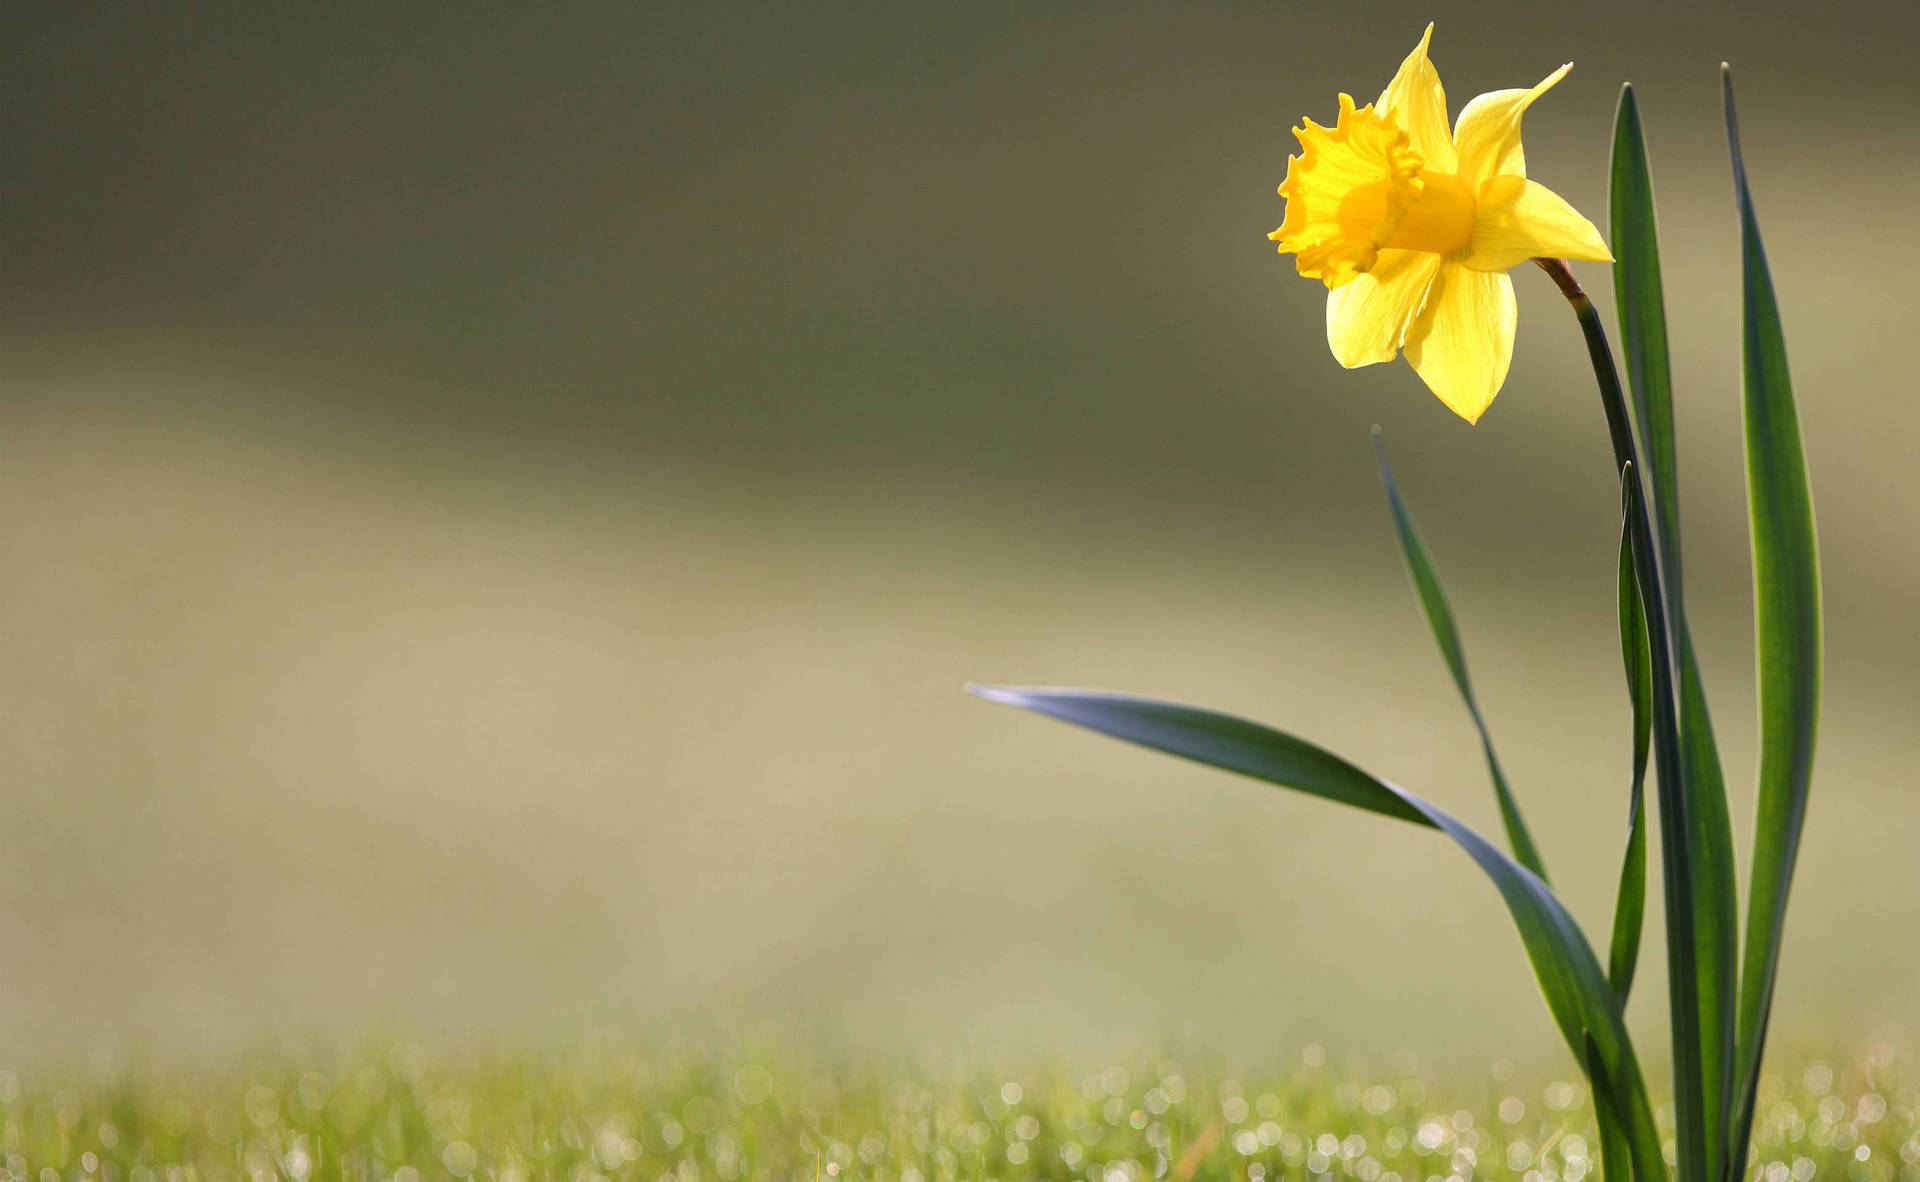 Daffodil At Grass Ground Background